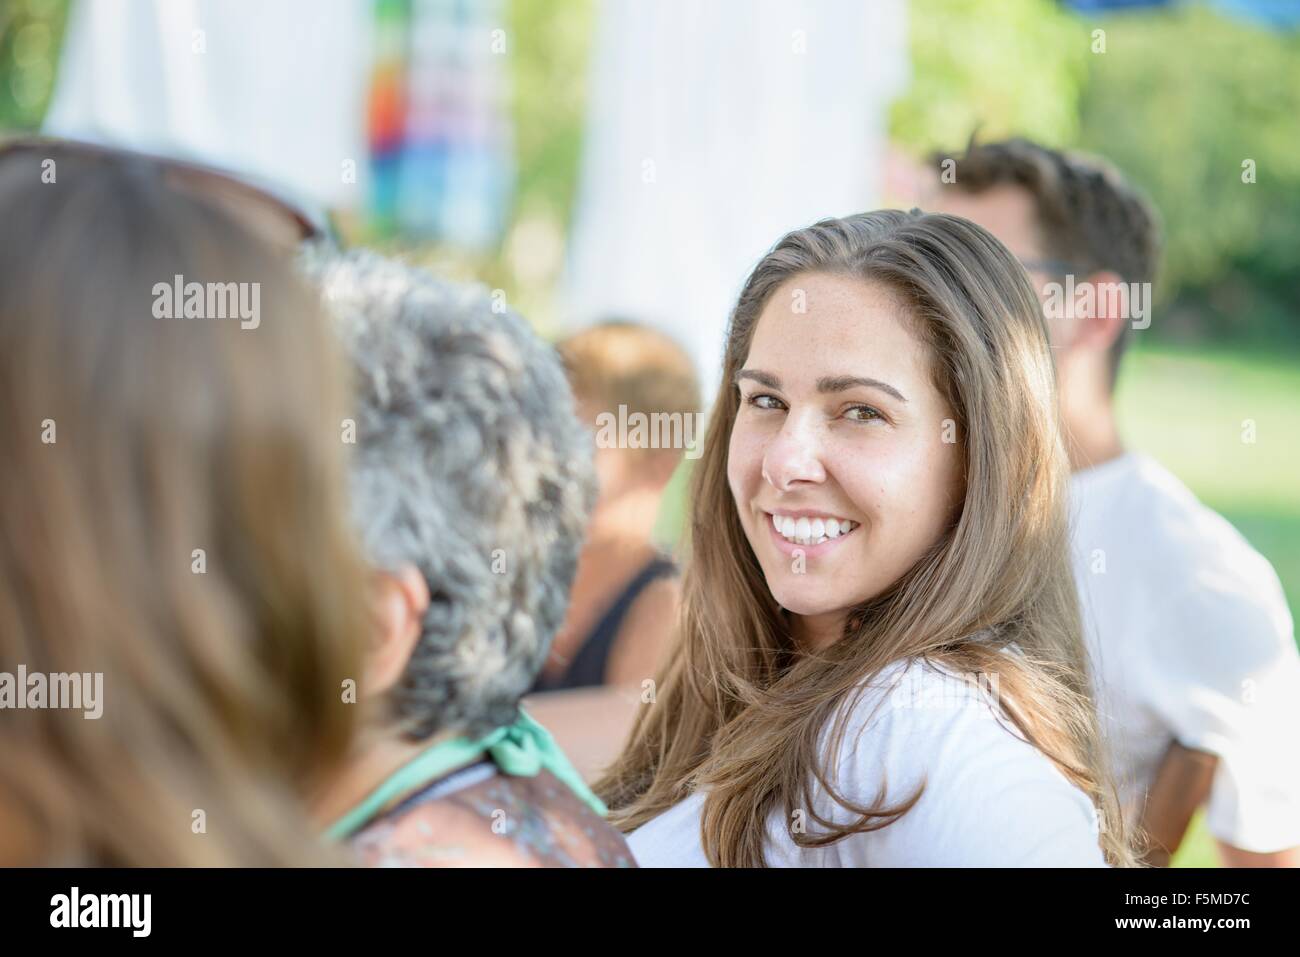 Woman smiling at tomato eating festival Stock Photo